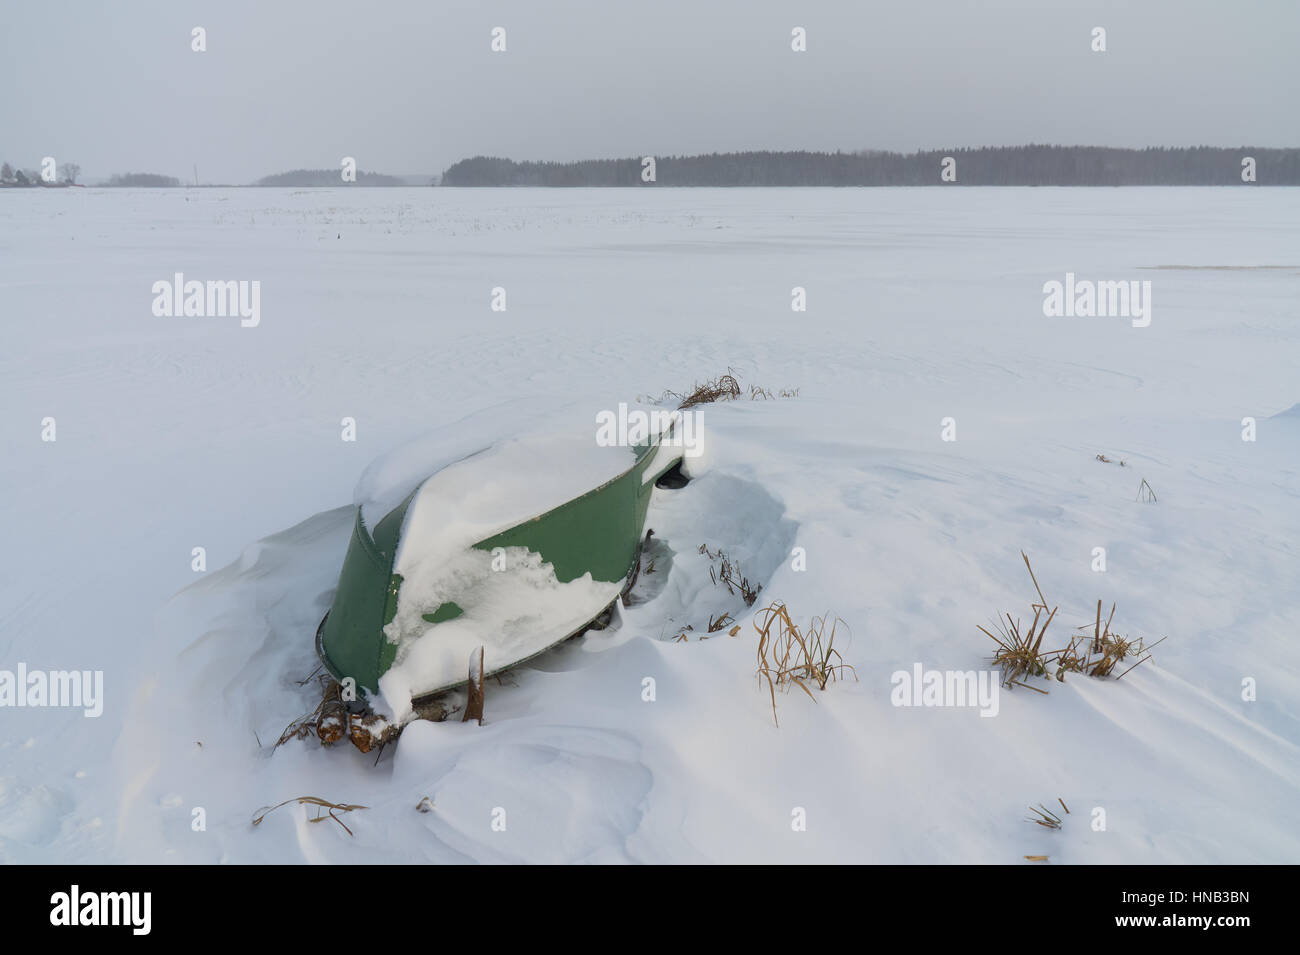 Winter landscape with green flipped over boat on the foreground. Peno lake, Tver oblast, Russia. Stock Photo